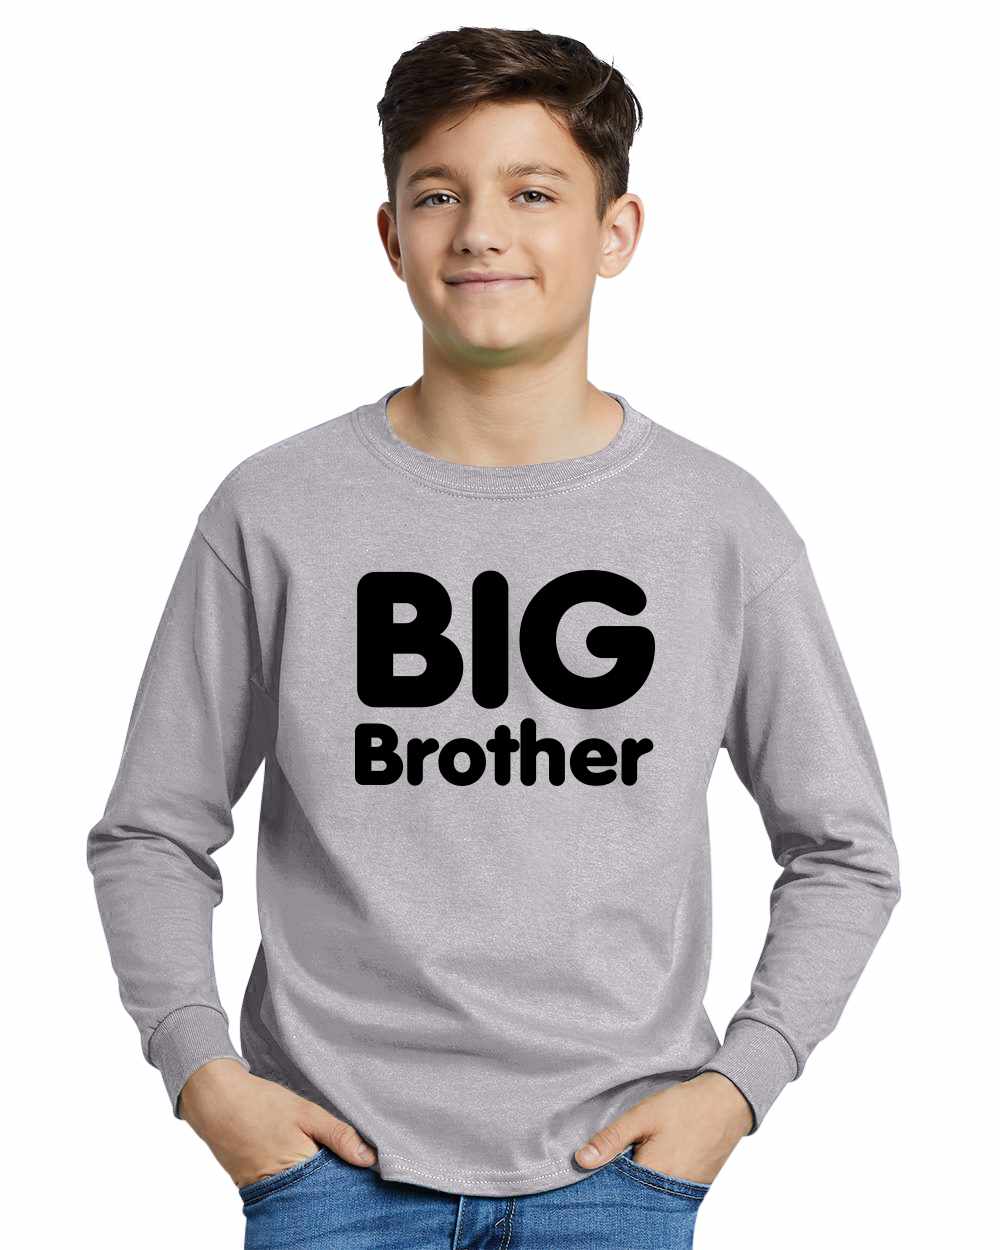 BIG BROTHER on Youth Long Sleeve Shirt (#809-203)